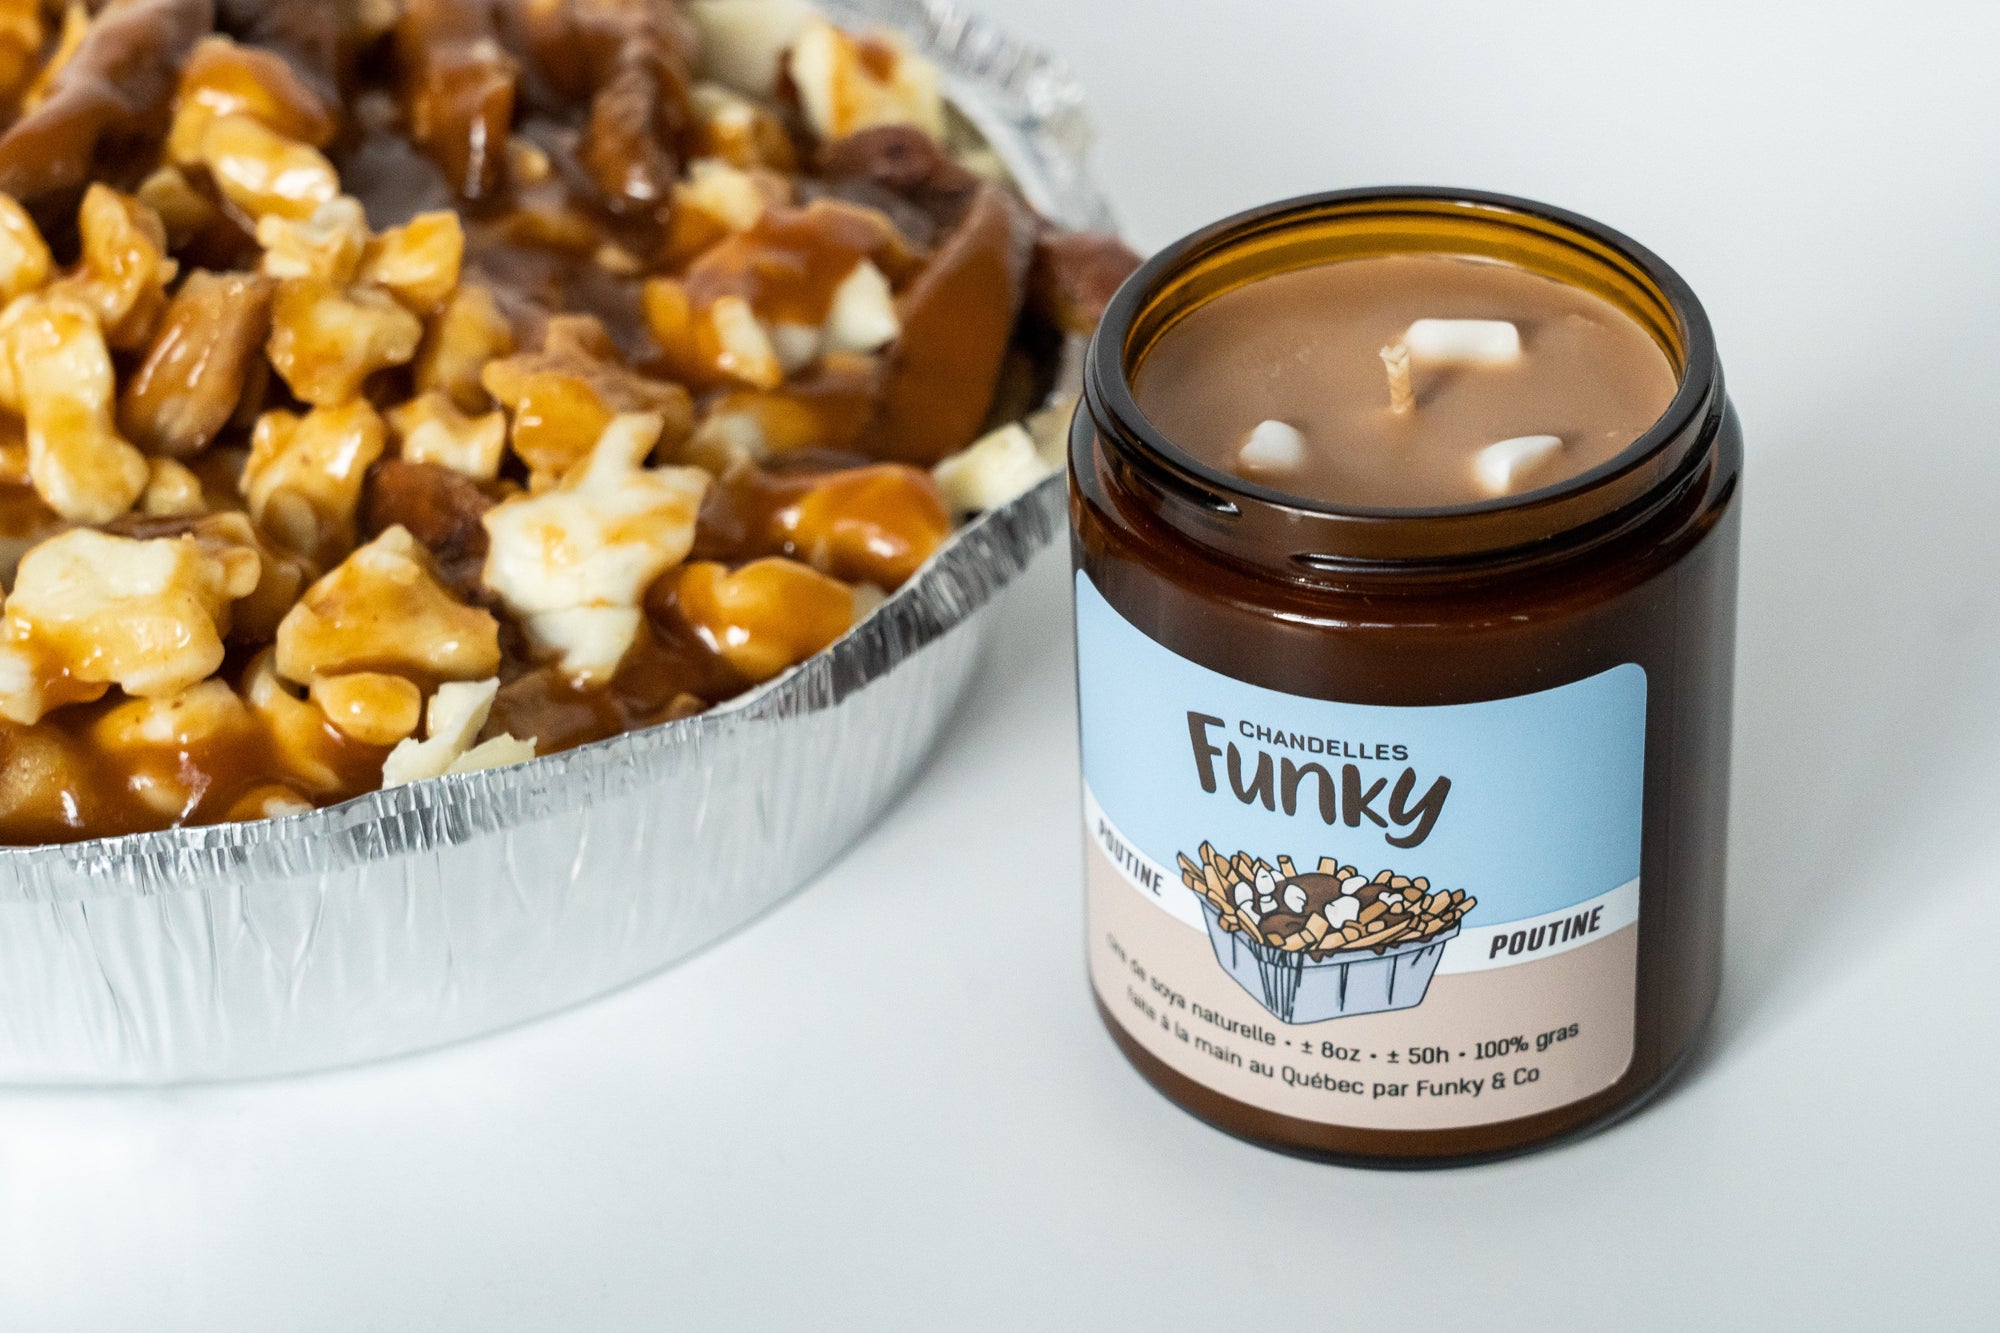 Chandelle Poutine - Funky - Funky & Co.